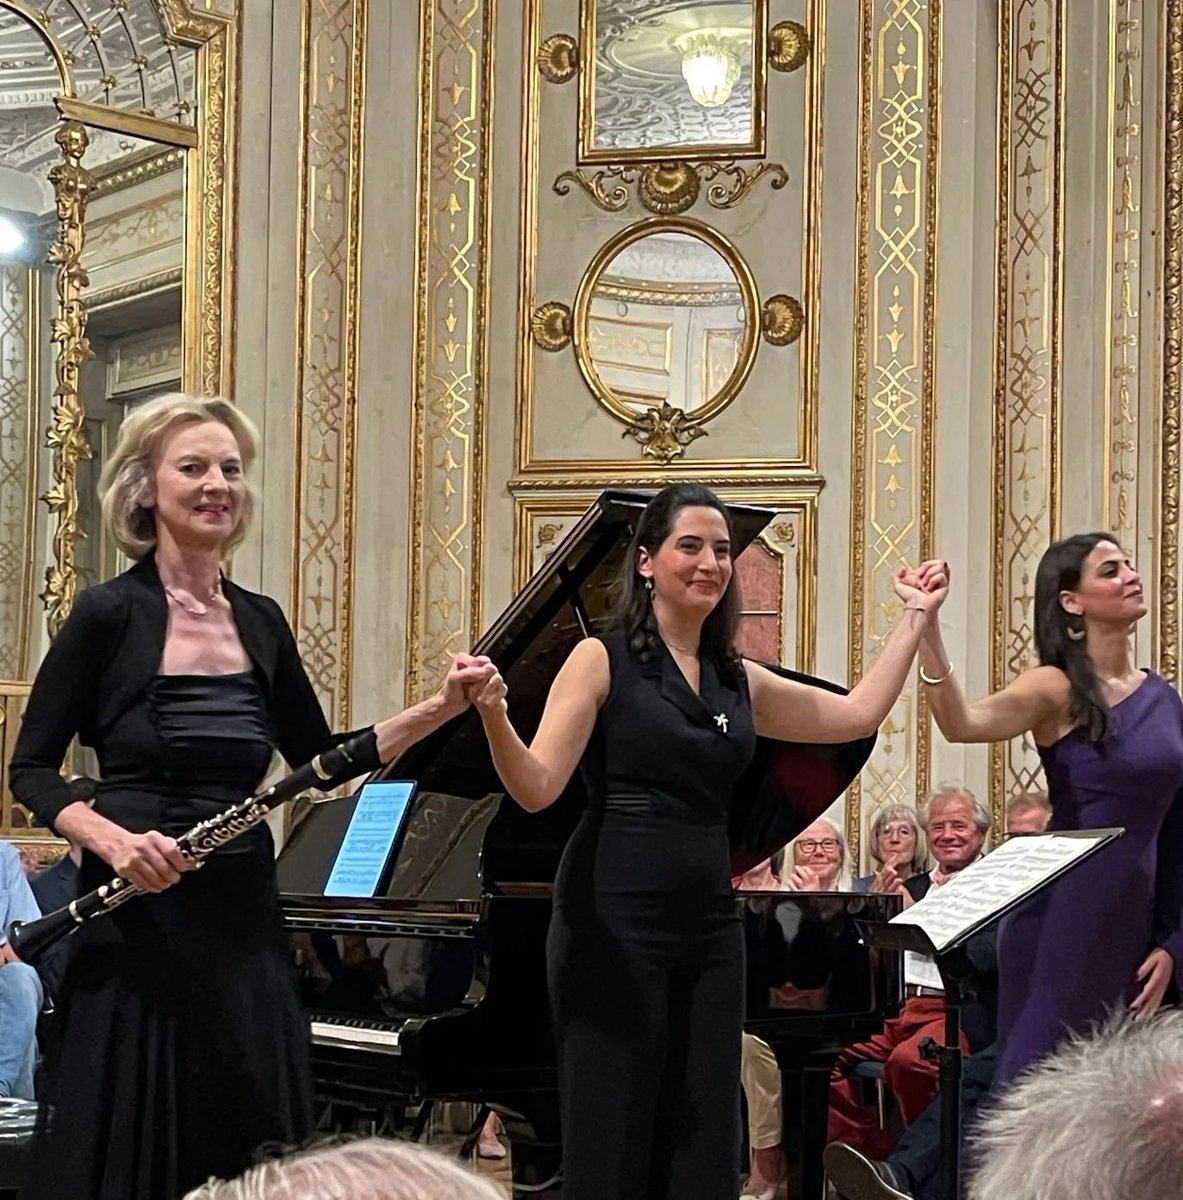 Thanks #GülruEnsari for inviting #SabineMeyer and me to join you for this very special evening of making music together at Schloss Neubeuern last weekend! Seeing you again after 17 years since #JugendMusiziert ‘07 and having a concert together was the biggest treat.